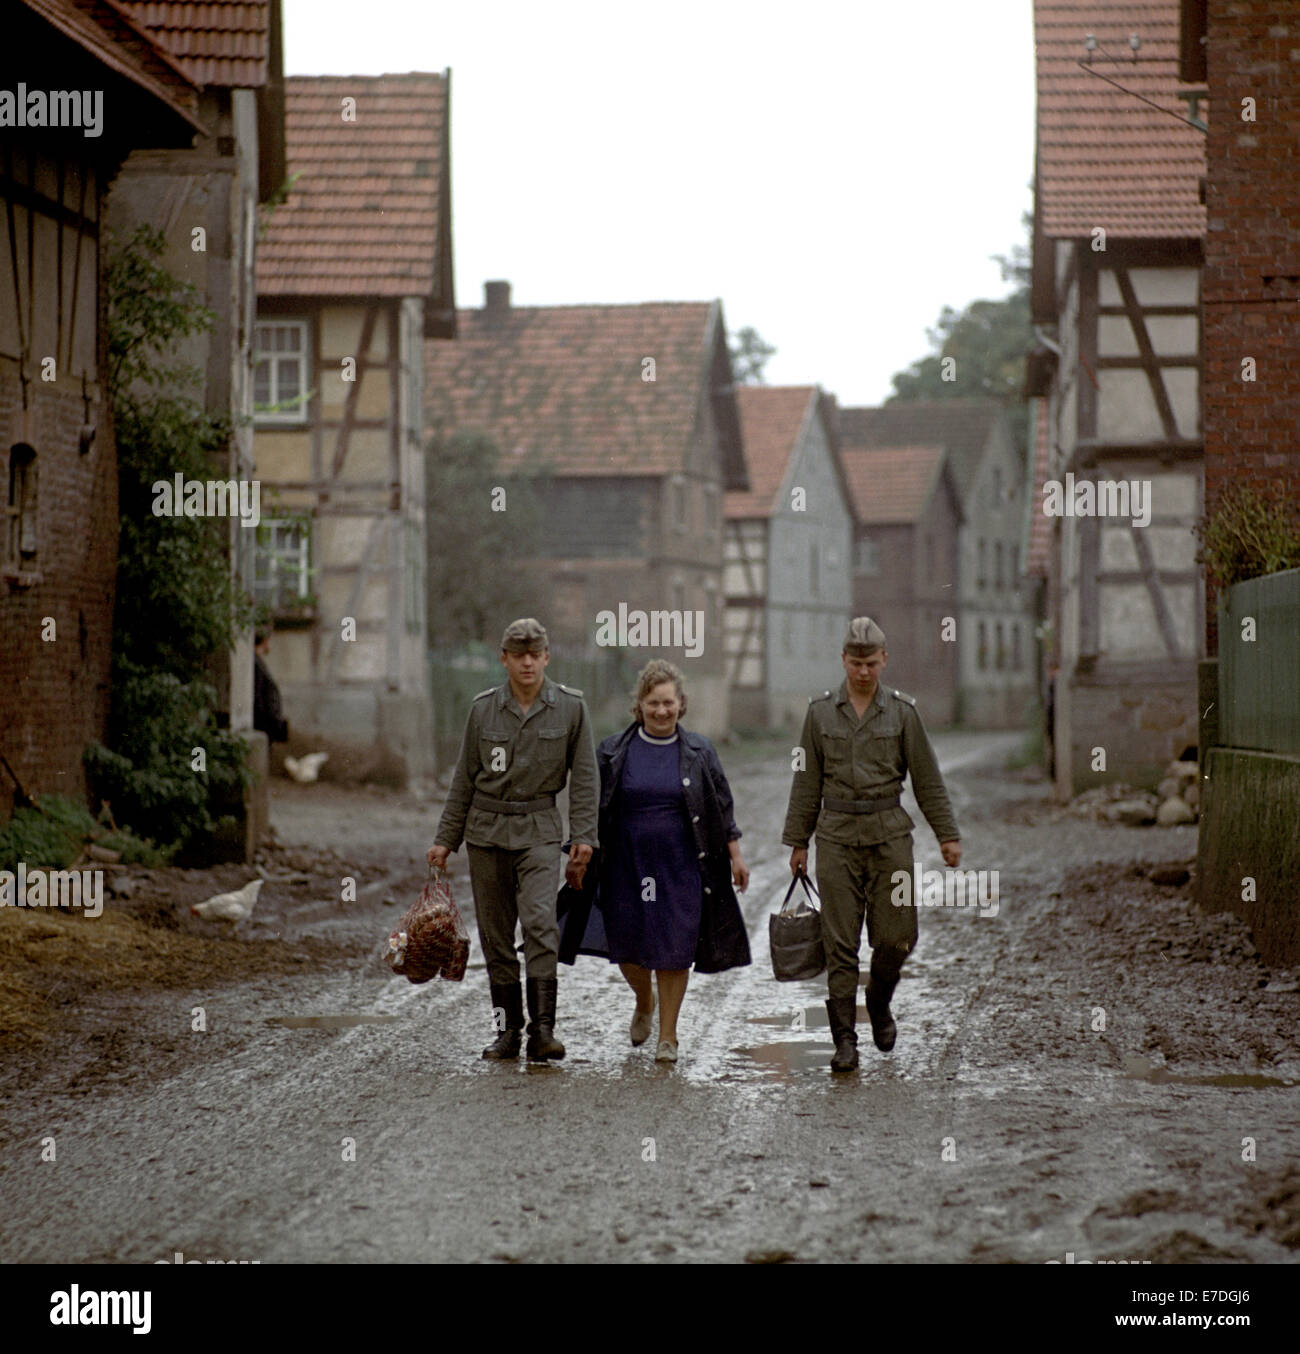 Two border soldiers from the East German National People's Army carry border unit cook Berta Niebel's bags and shopping nets through the derelict town Motzlar in der Rhoen, Germany, October 1968. The town is located directly in the border region between East and West Germany. It was empty and a special permit was needed to visit the town. Photo: Wilfried Glienke Stock Photo